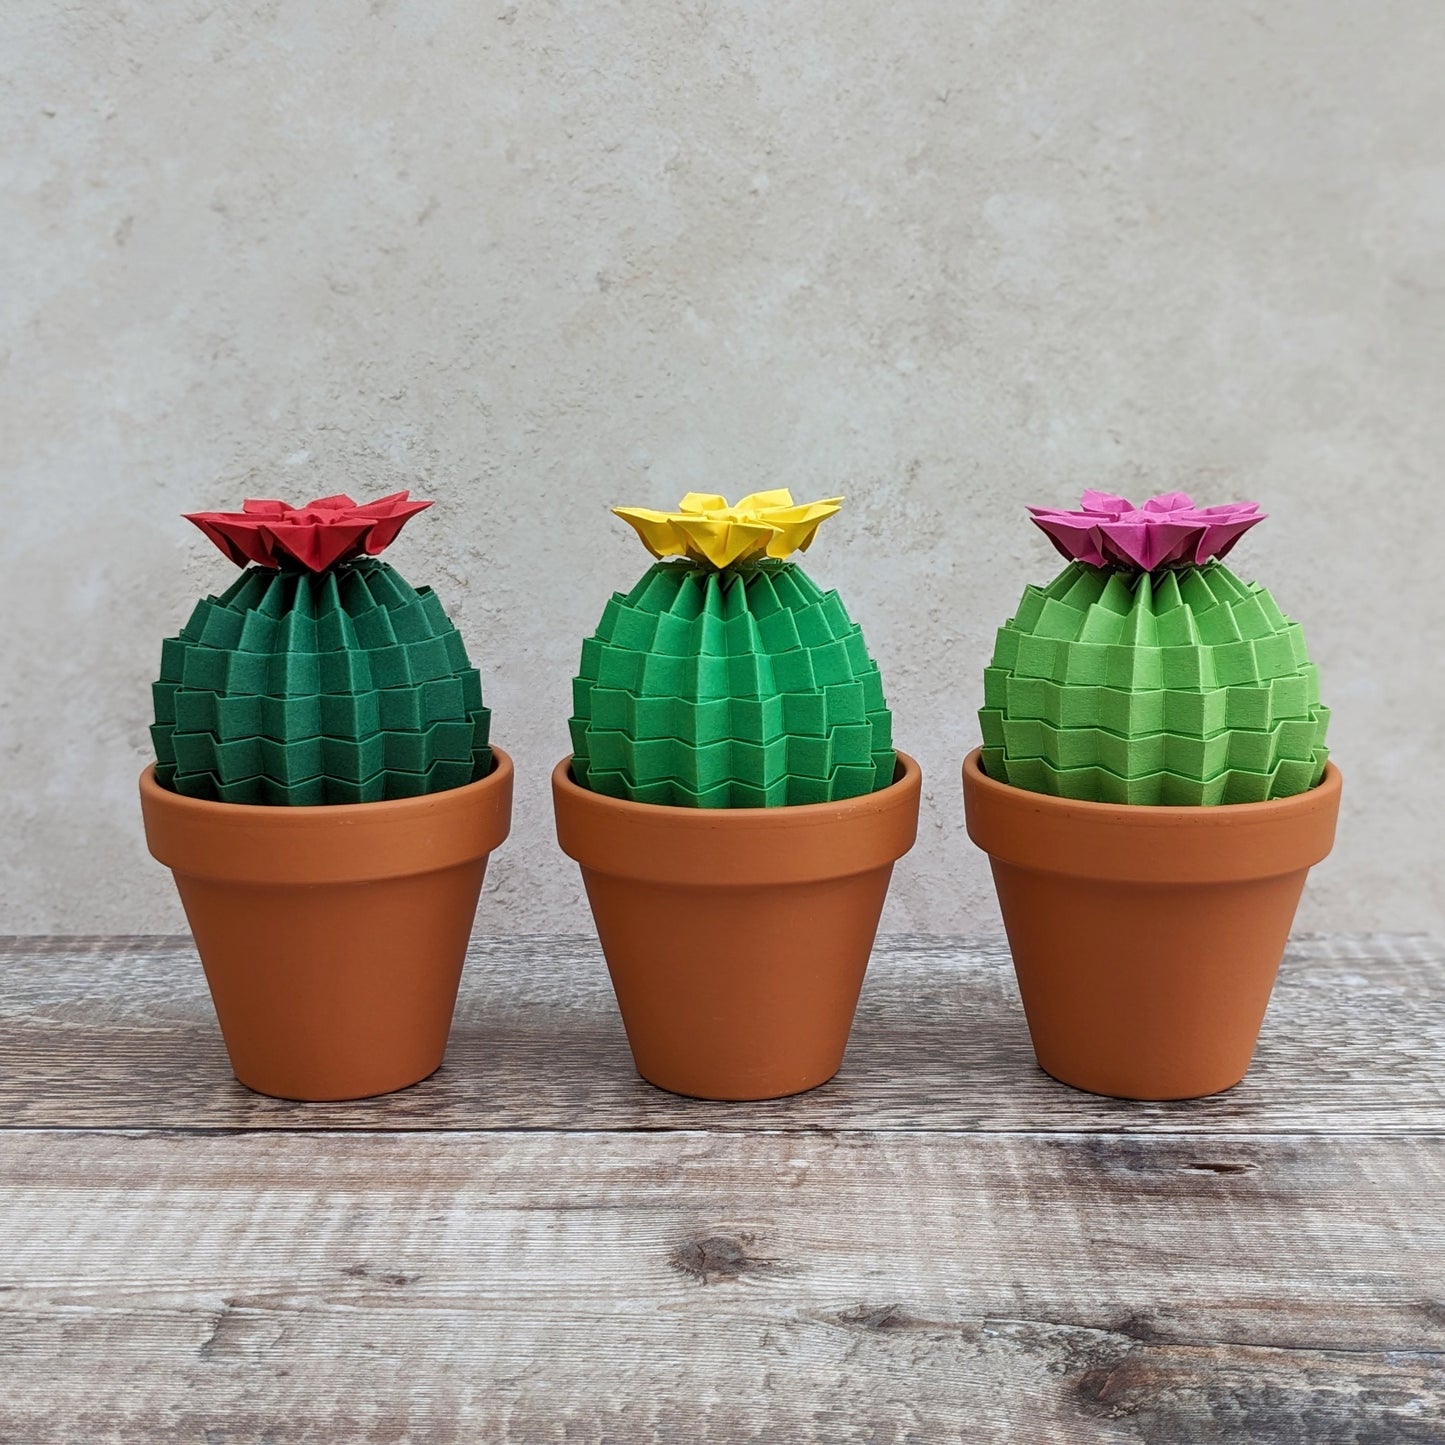 Green origami flowering cactus, large paper pot plant gift